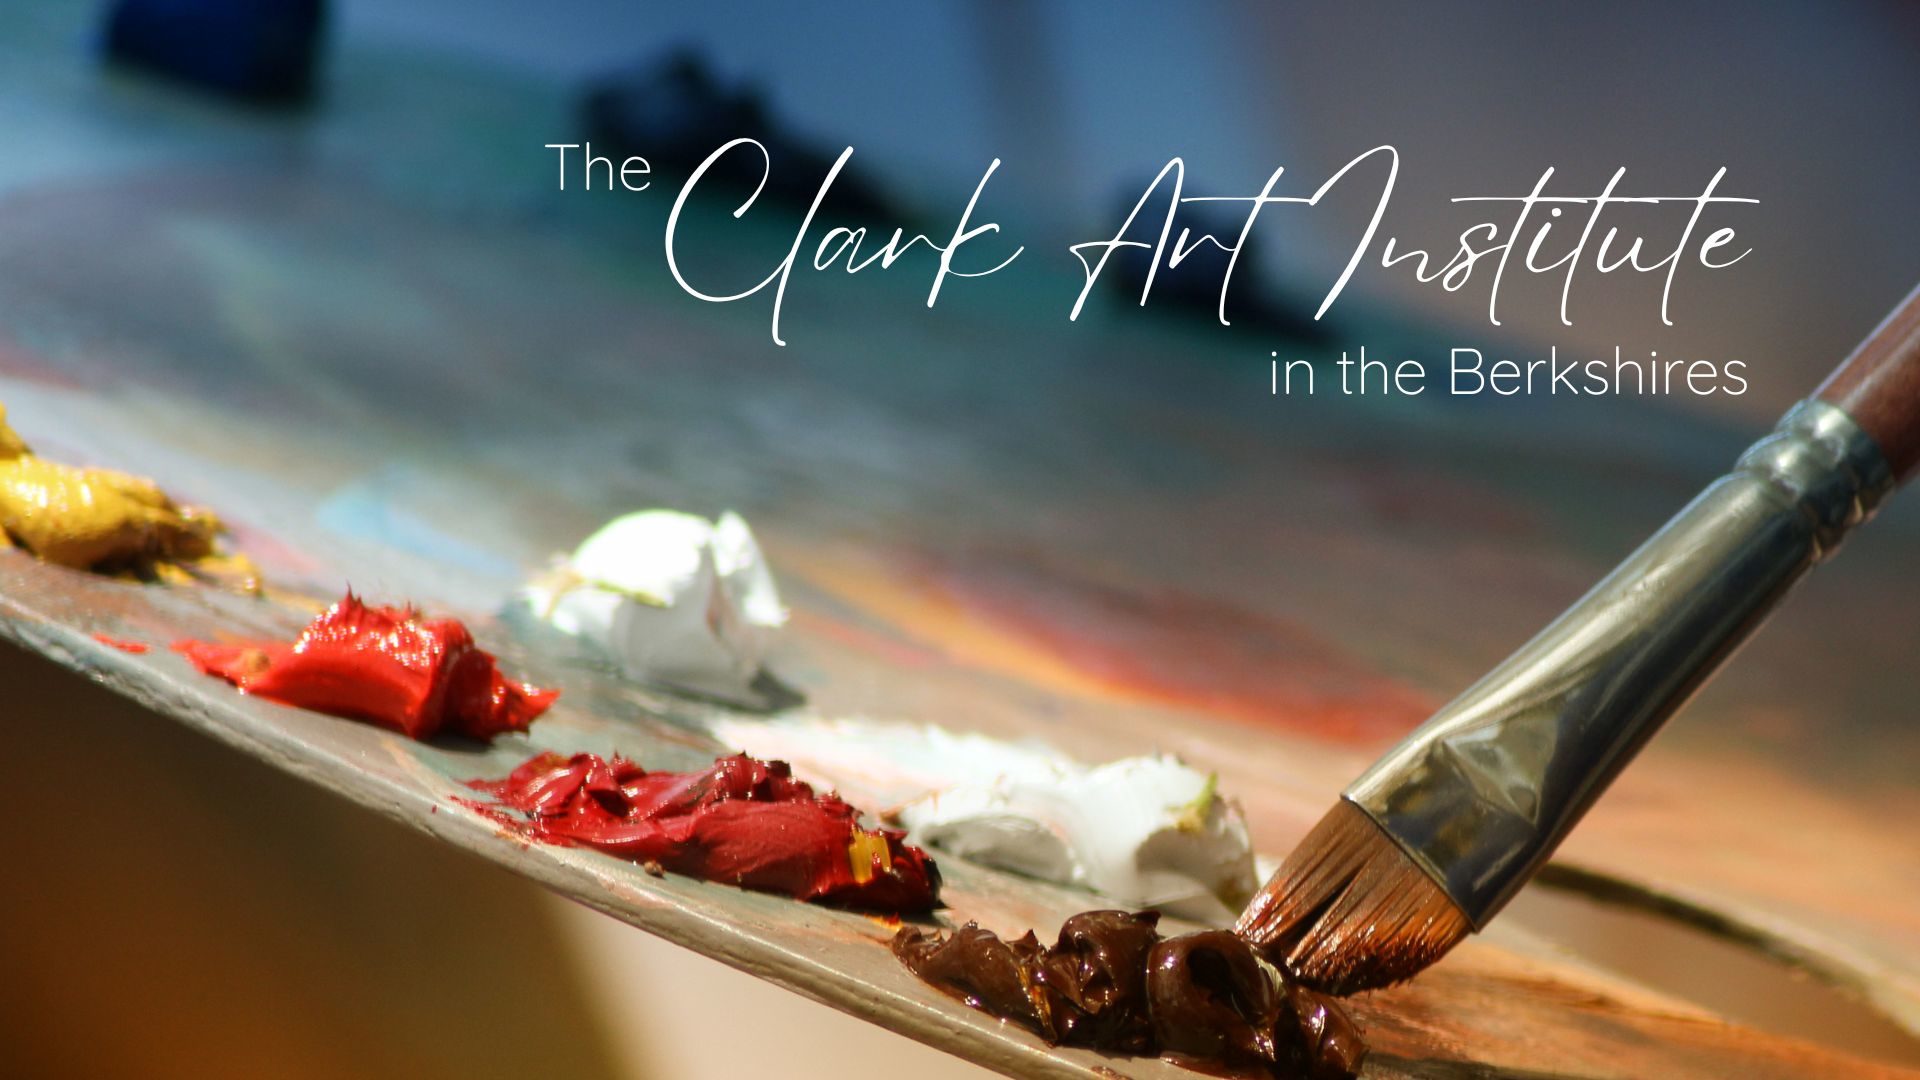 A paint brush dipping into the paint on a painter’s palette with text overlay “The Clark Art Institute in the Berkshires”